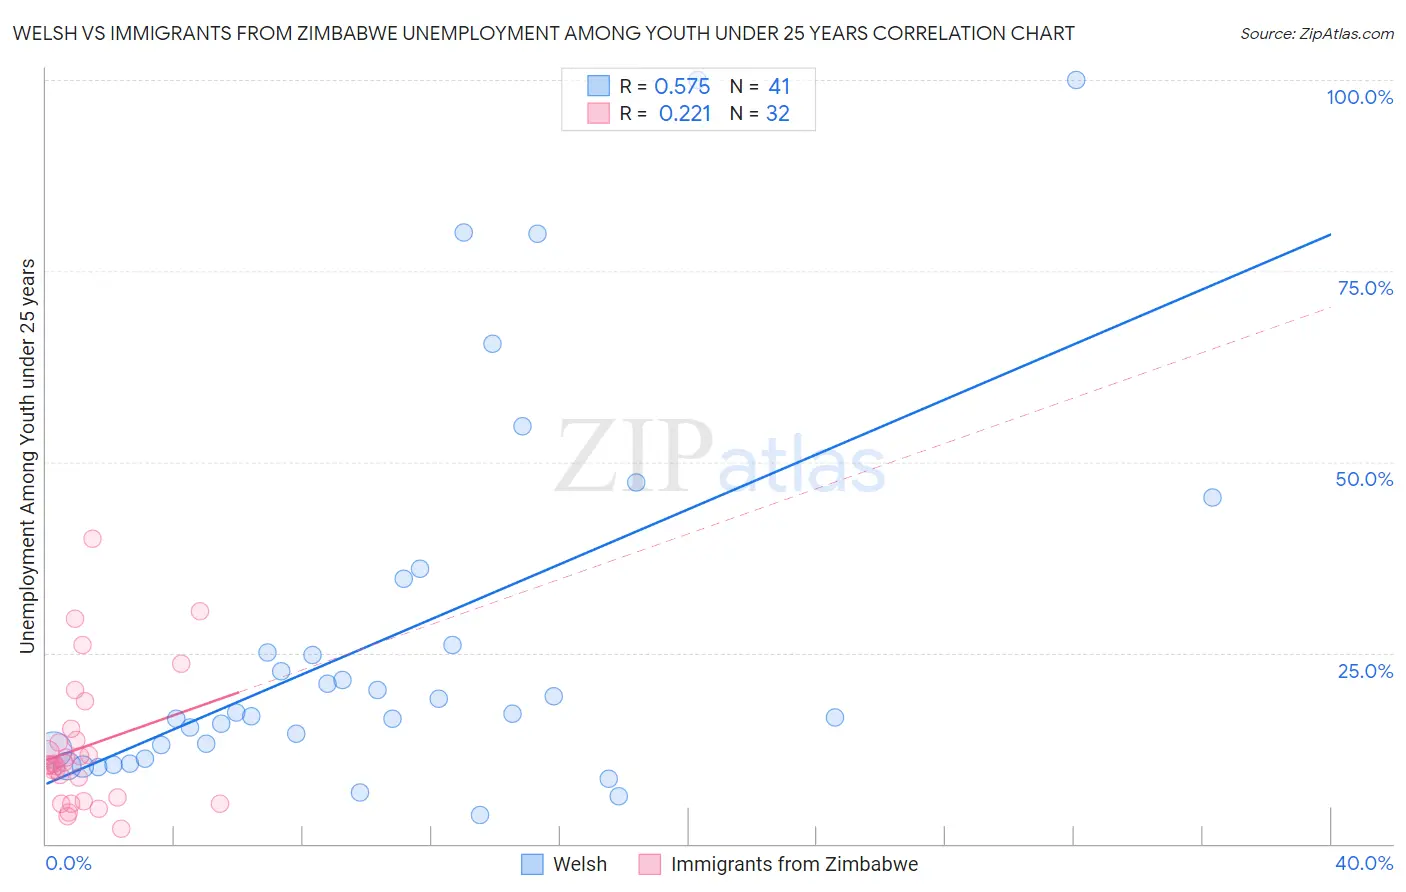 Welsh vs Immigrants from Zimbabwe Unemployment Among Youth under 25 years